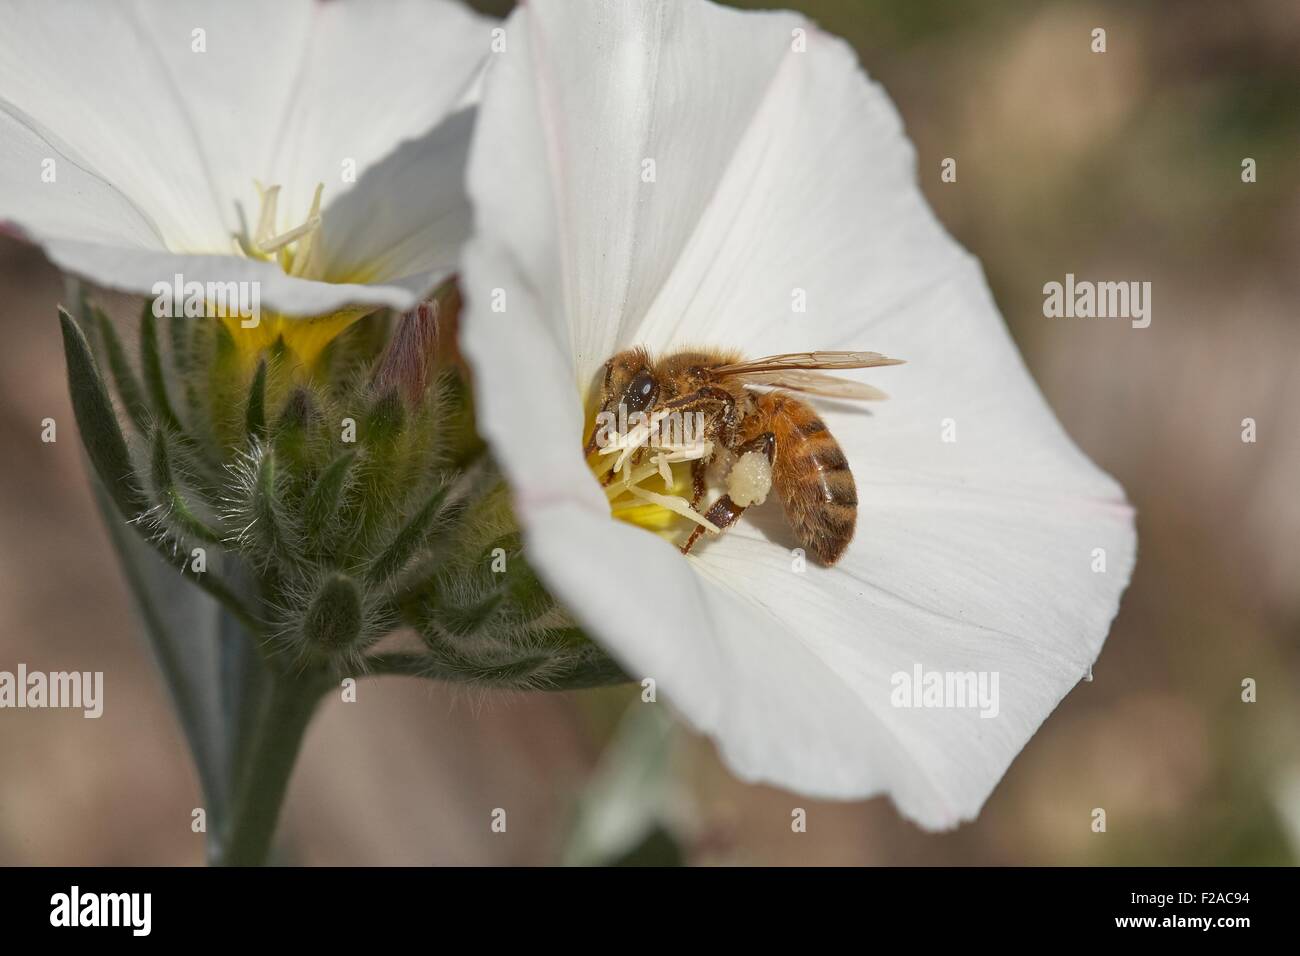 European honeybee Apis mellifera collecting nectar Convolvulus cneorum, also known as silverbush, is a species of flowering plan Stock Photo